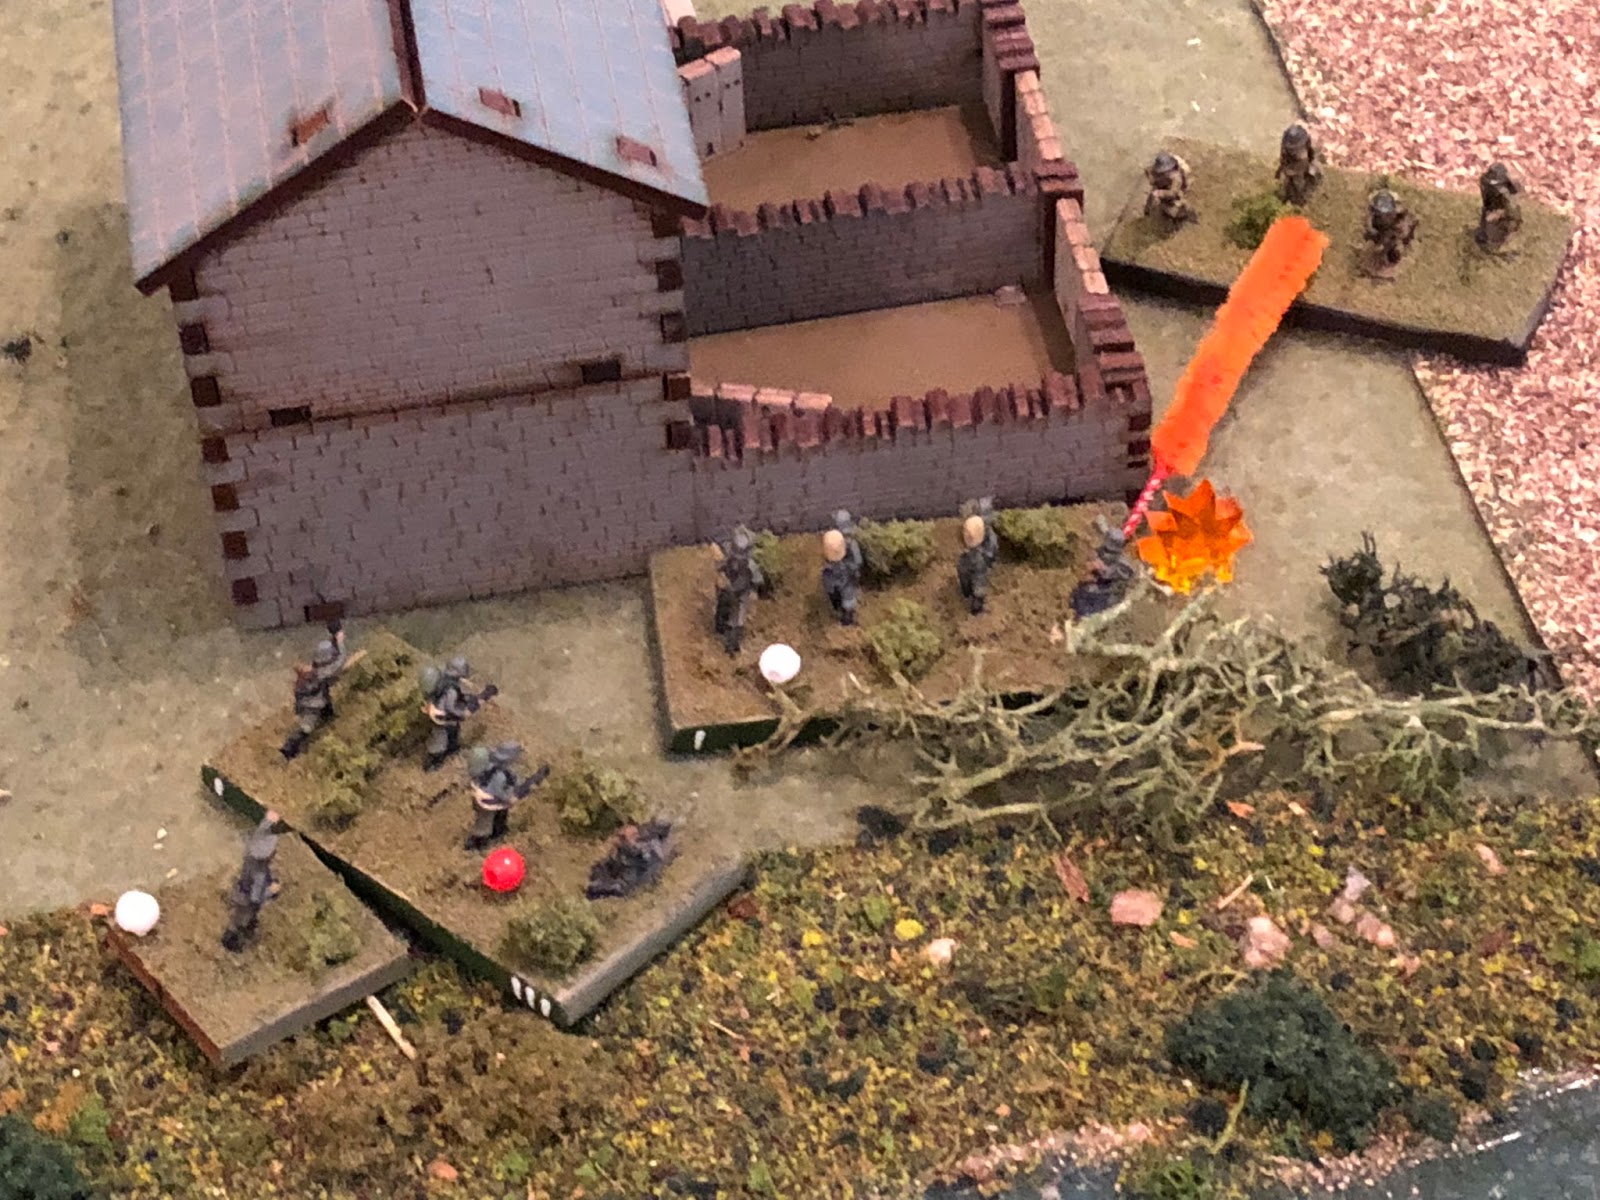  SSgt Gradl (white bead at bottom left), Sgt Hafl's squad, and Sgt Barkstrom's squads are all suppressed!!!  Holy @#$%, they can't do that!!!&nbsp; One round of fire at point-blank range and the German engineers are in very big trouble!!! 